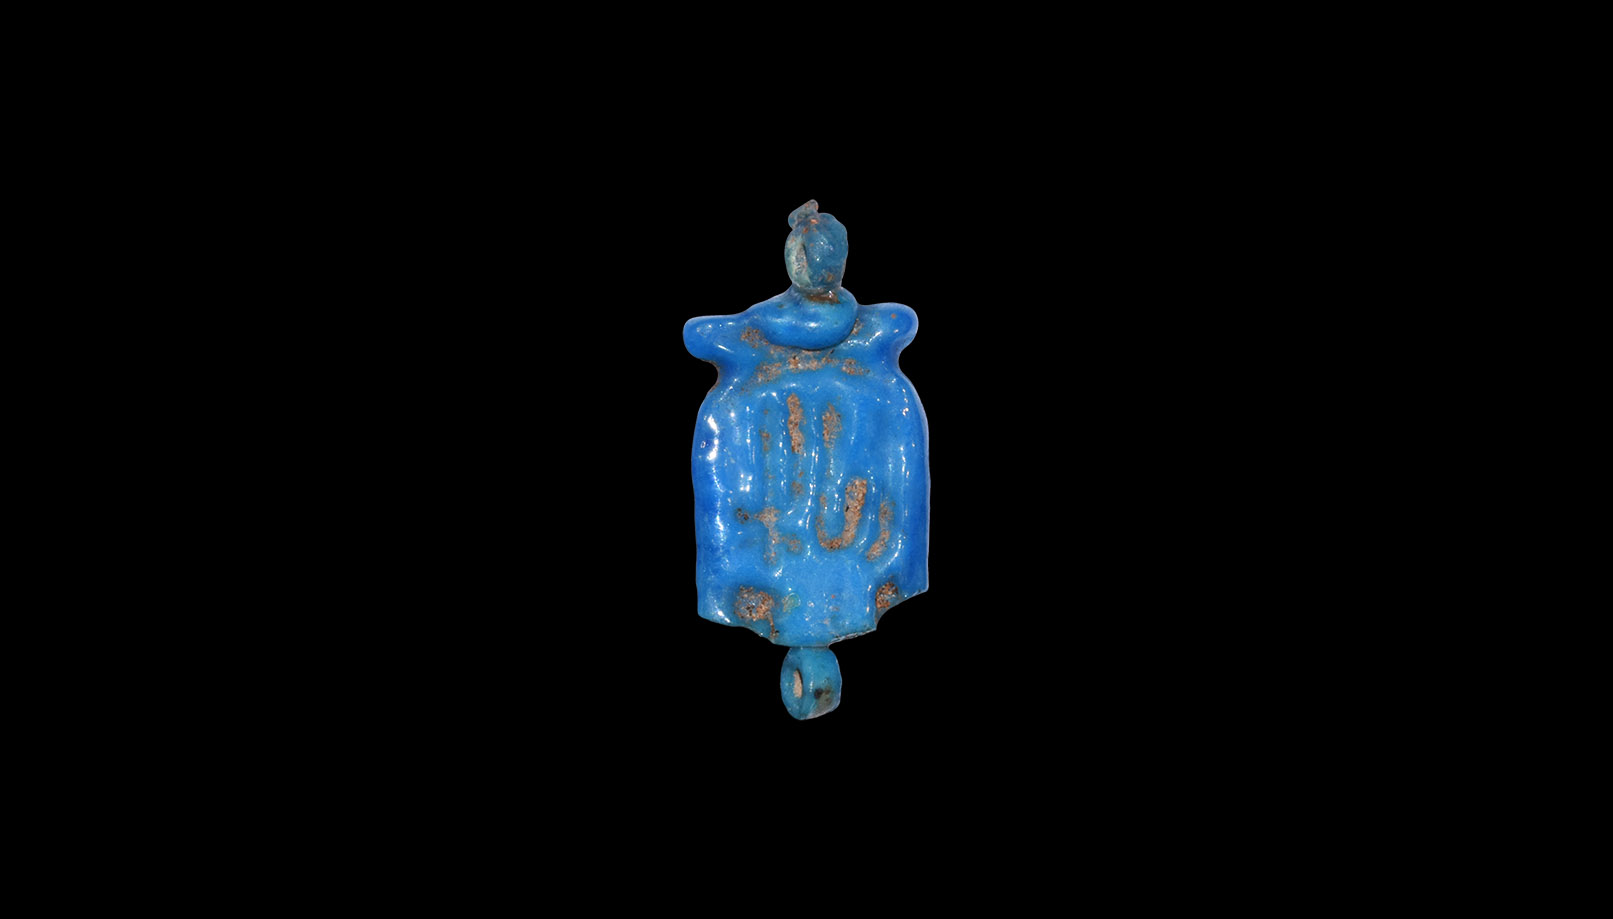 Egyptian Amulet with Ramesses Cartouche